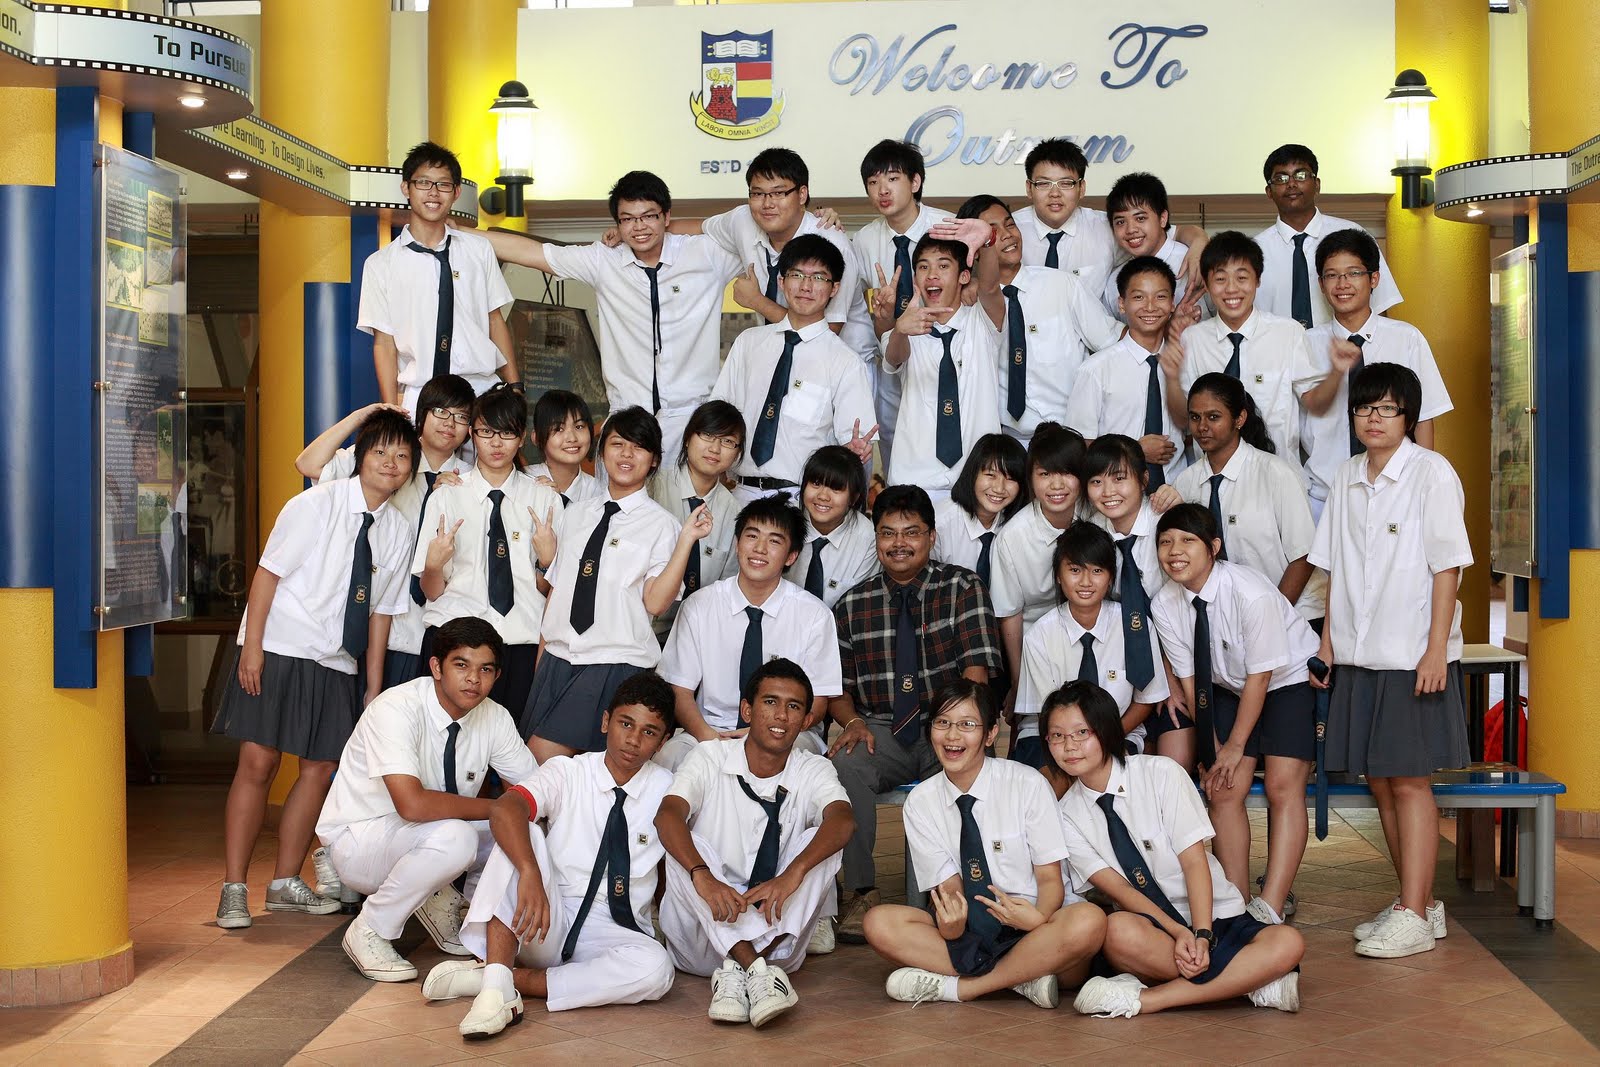 everyday: Proud student of Outram Secondary School (